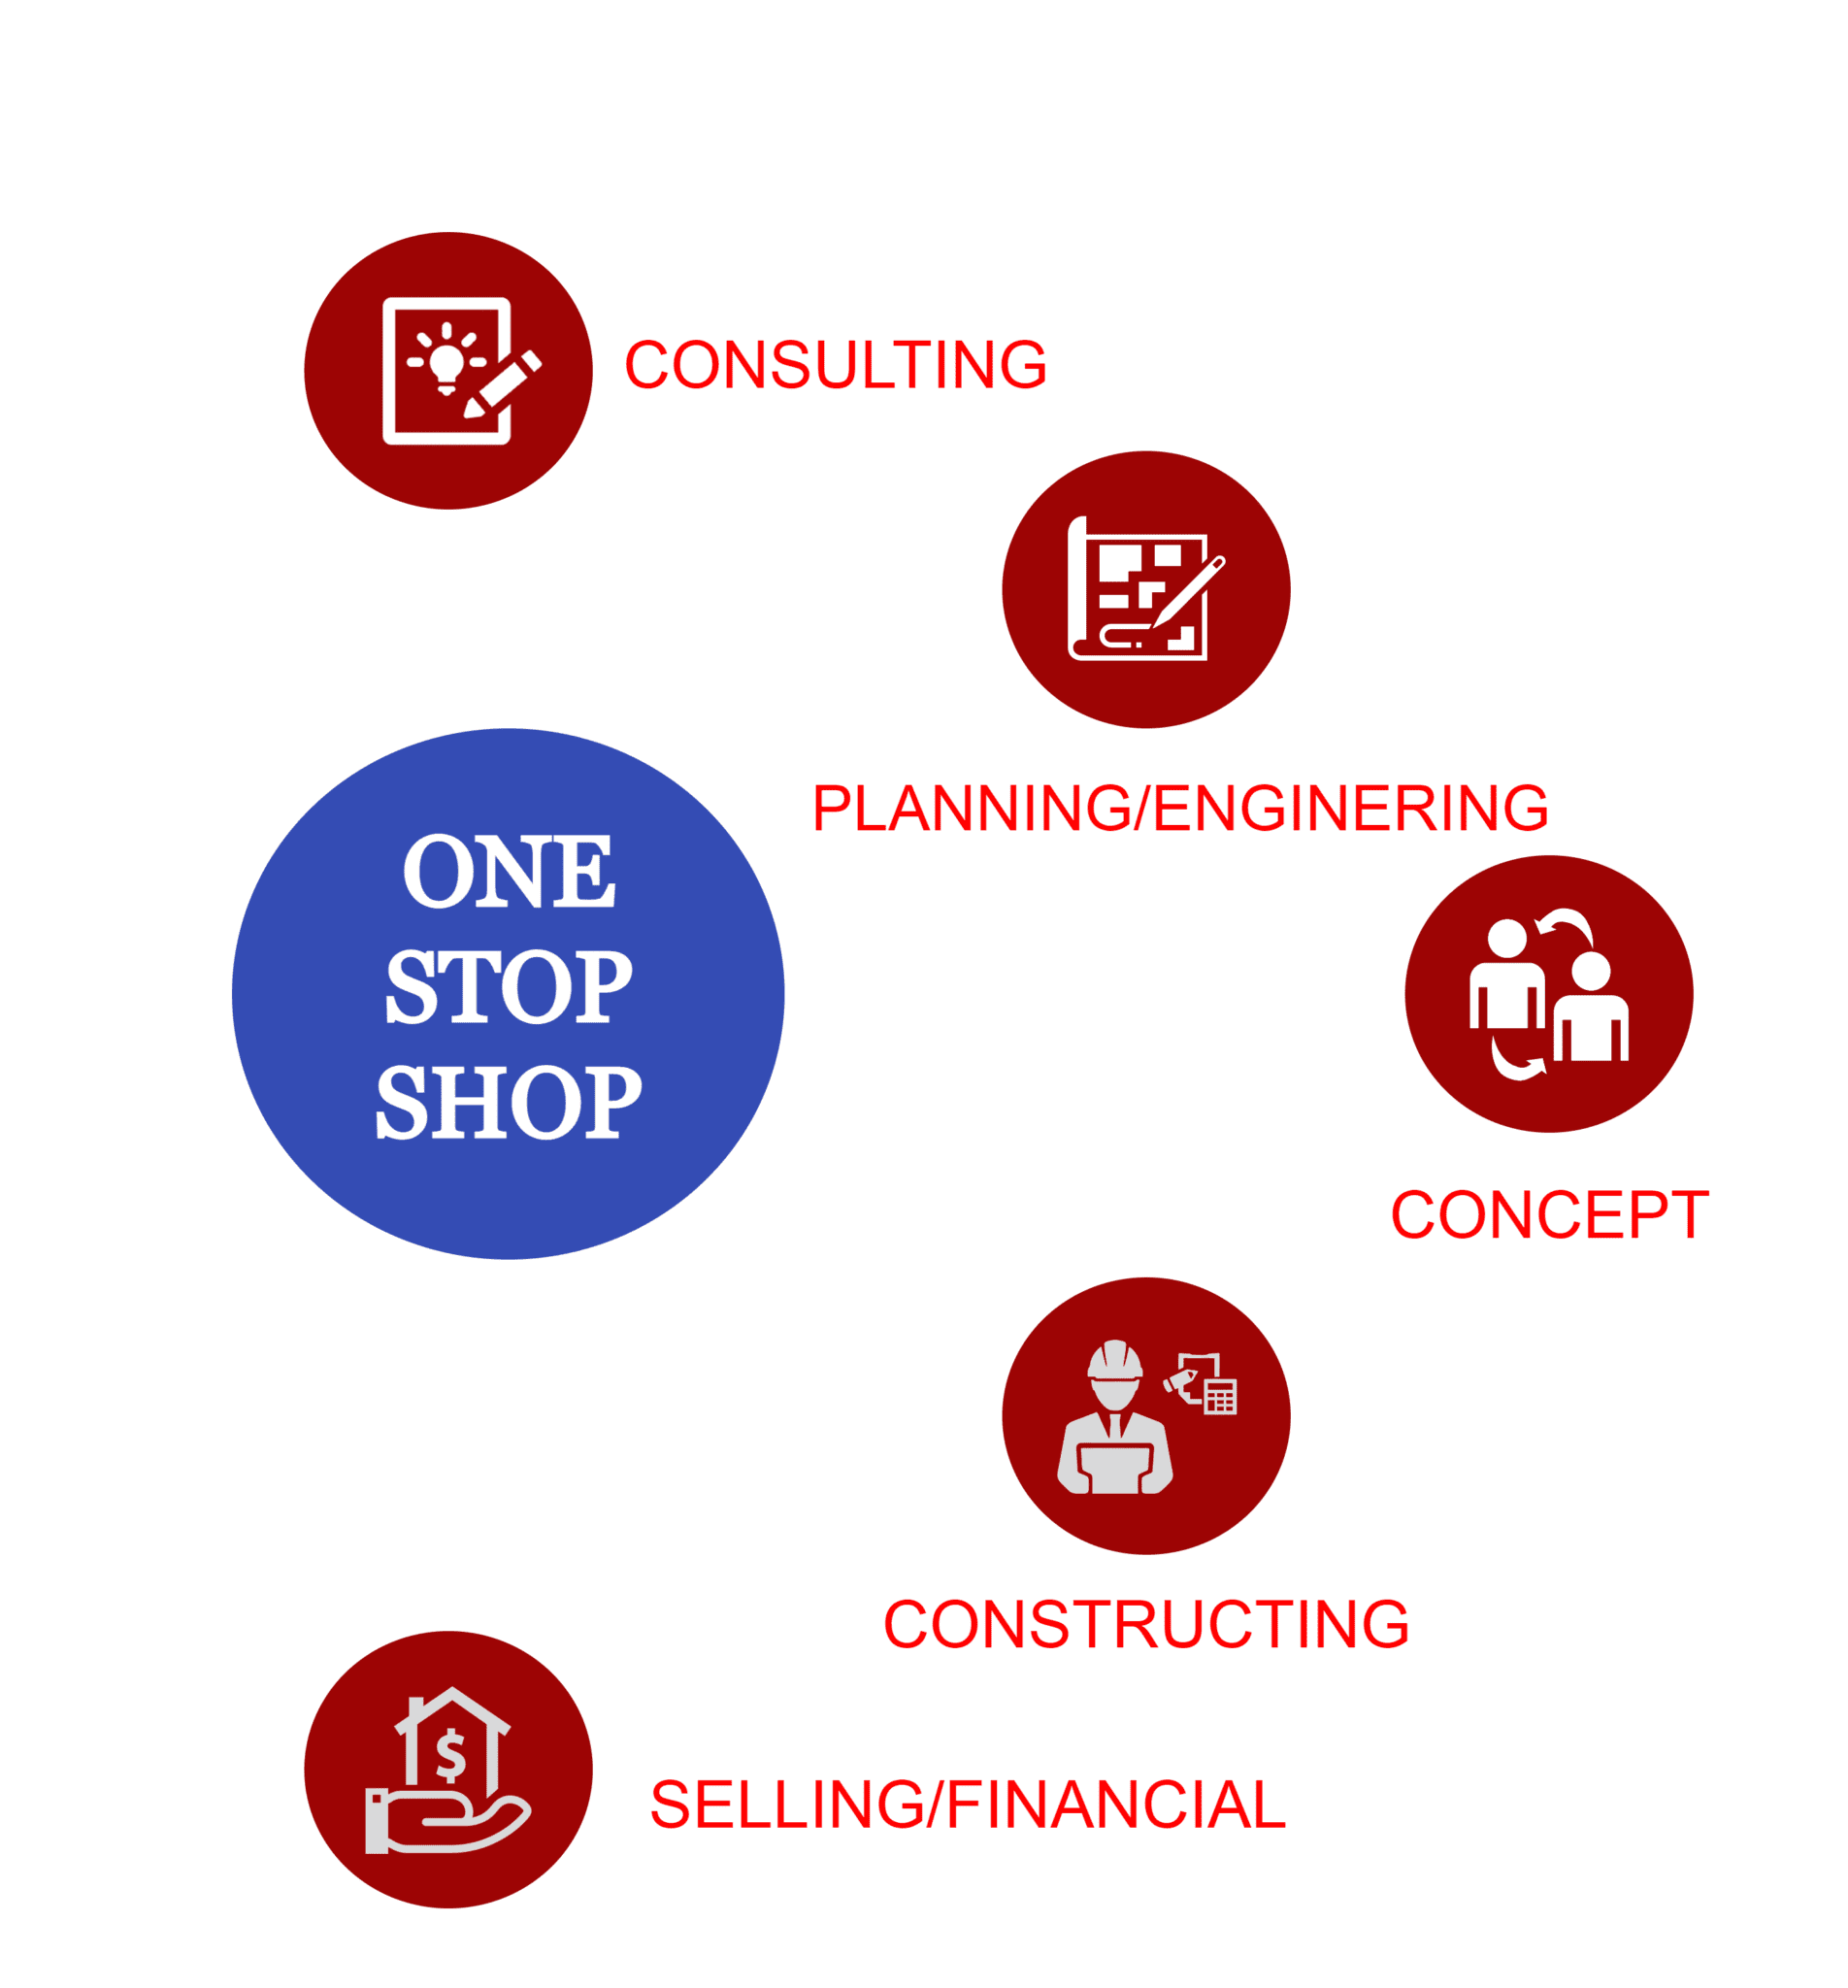 One Stop Shop - ONE STOP SHOP